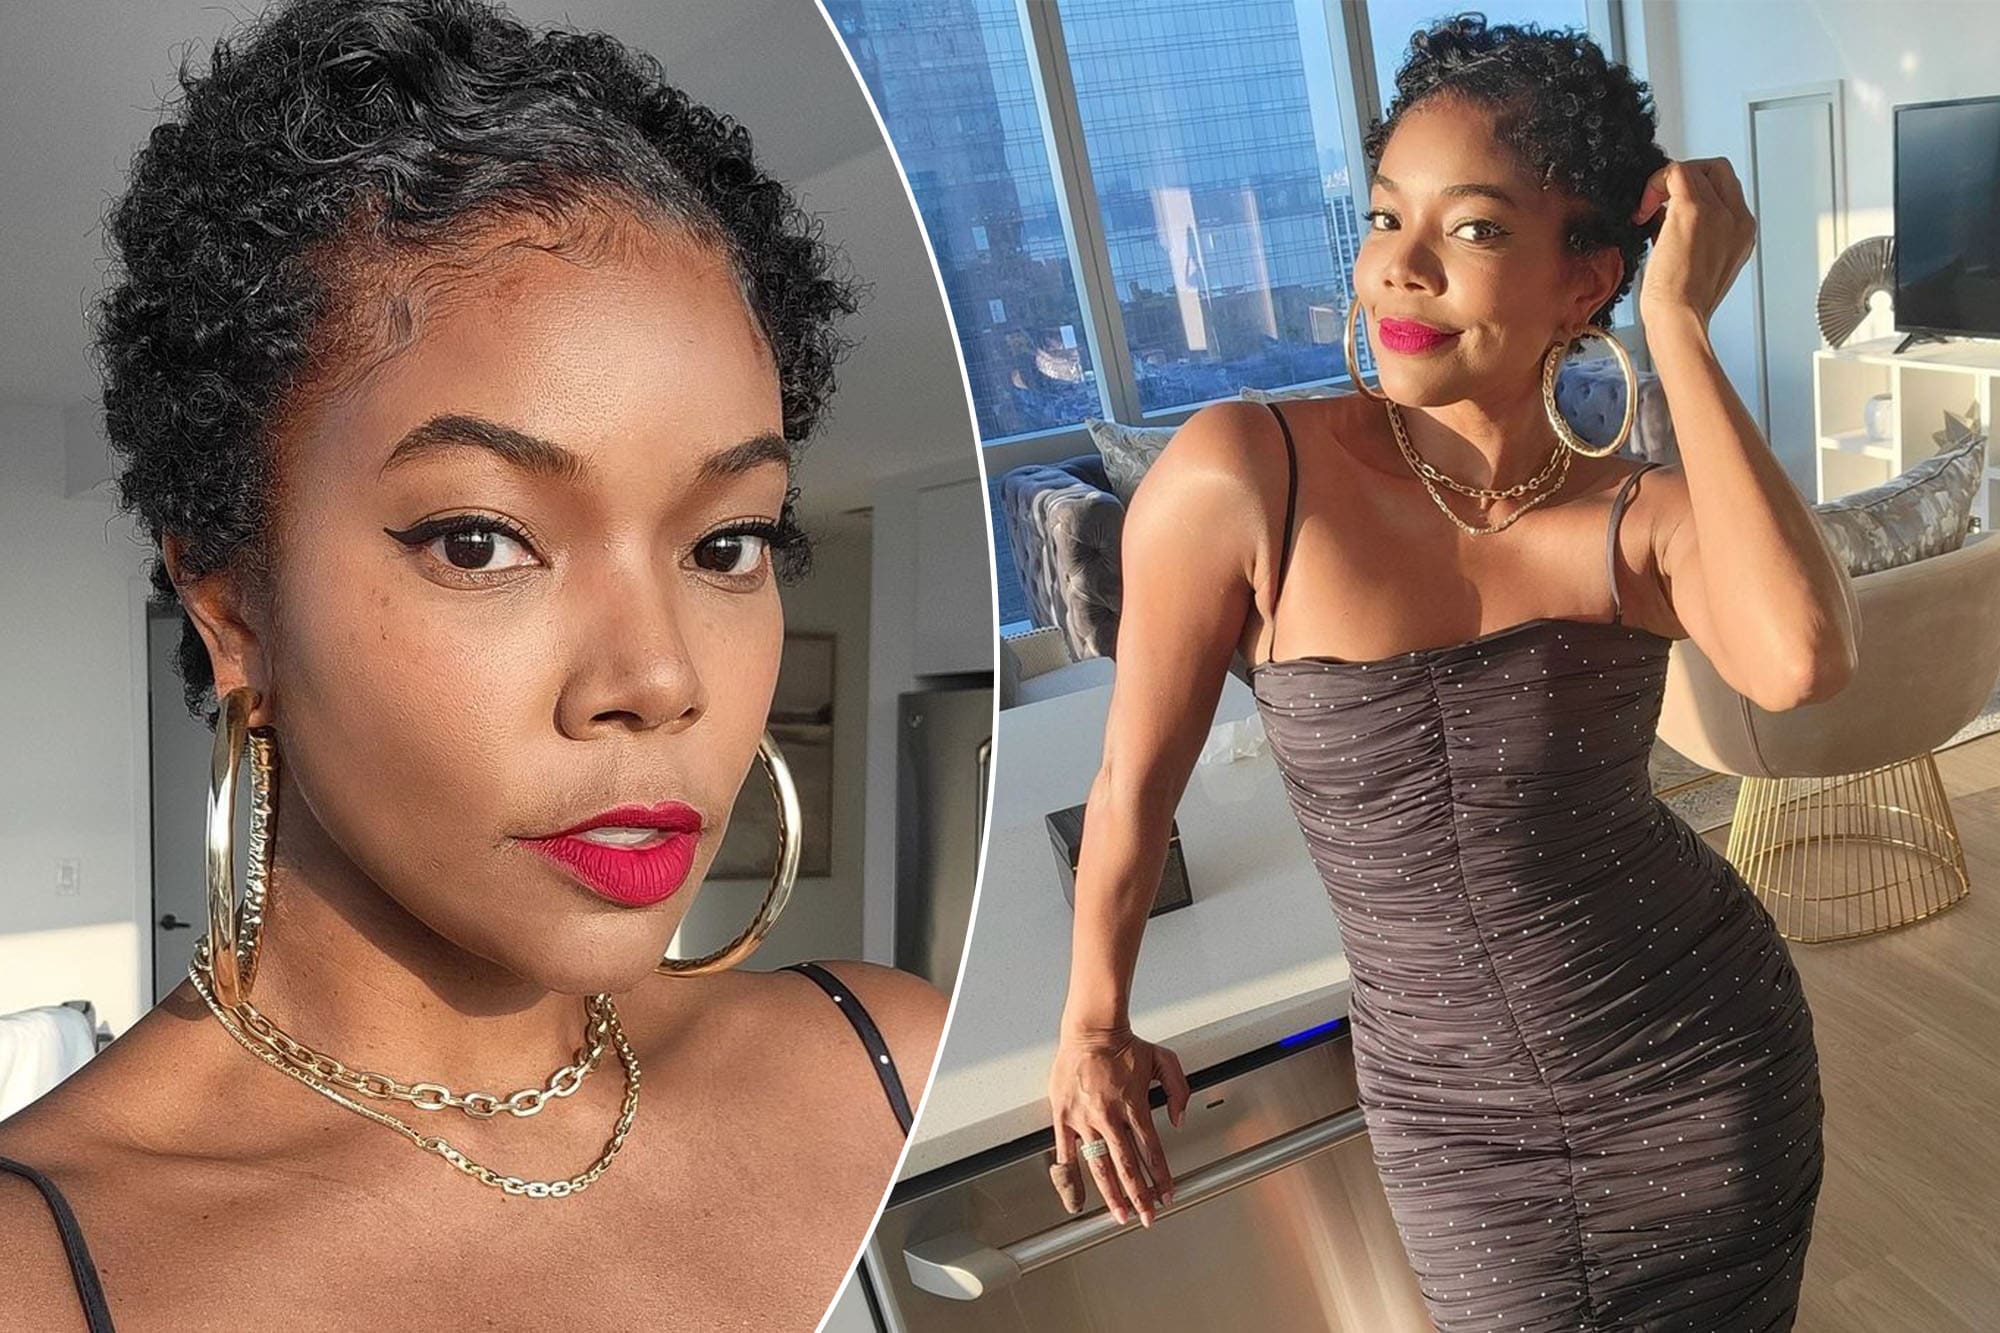 gabrielle-union-shares-photos-featuring-kaavia-james-and-fans-are-in-awe